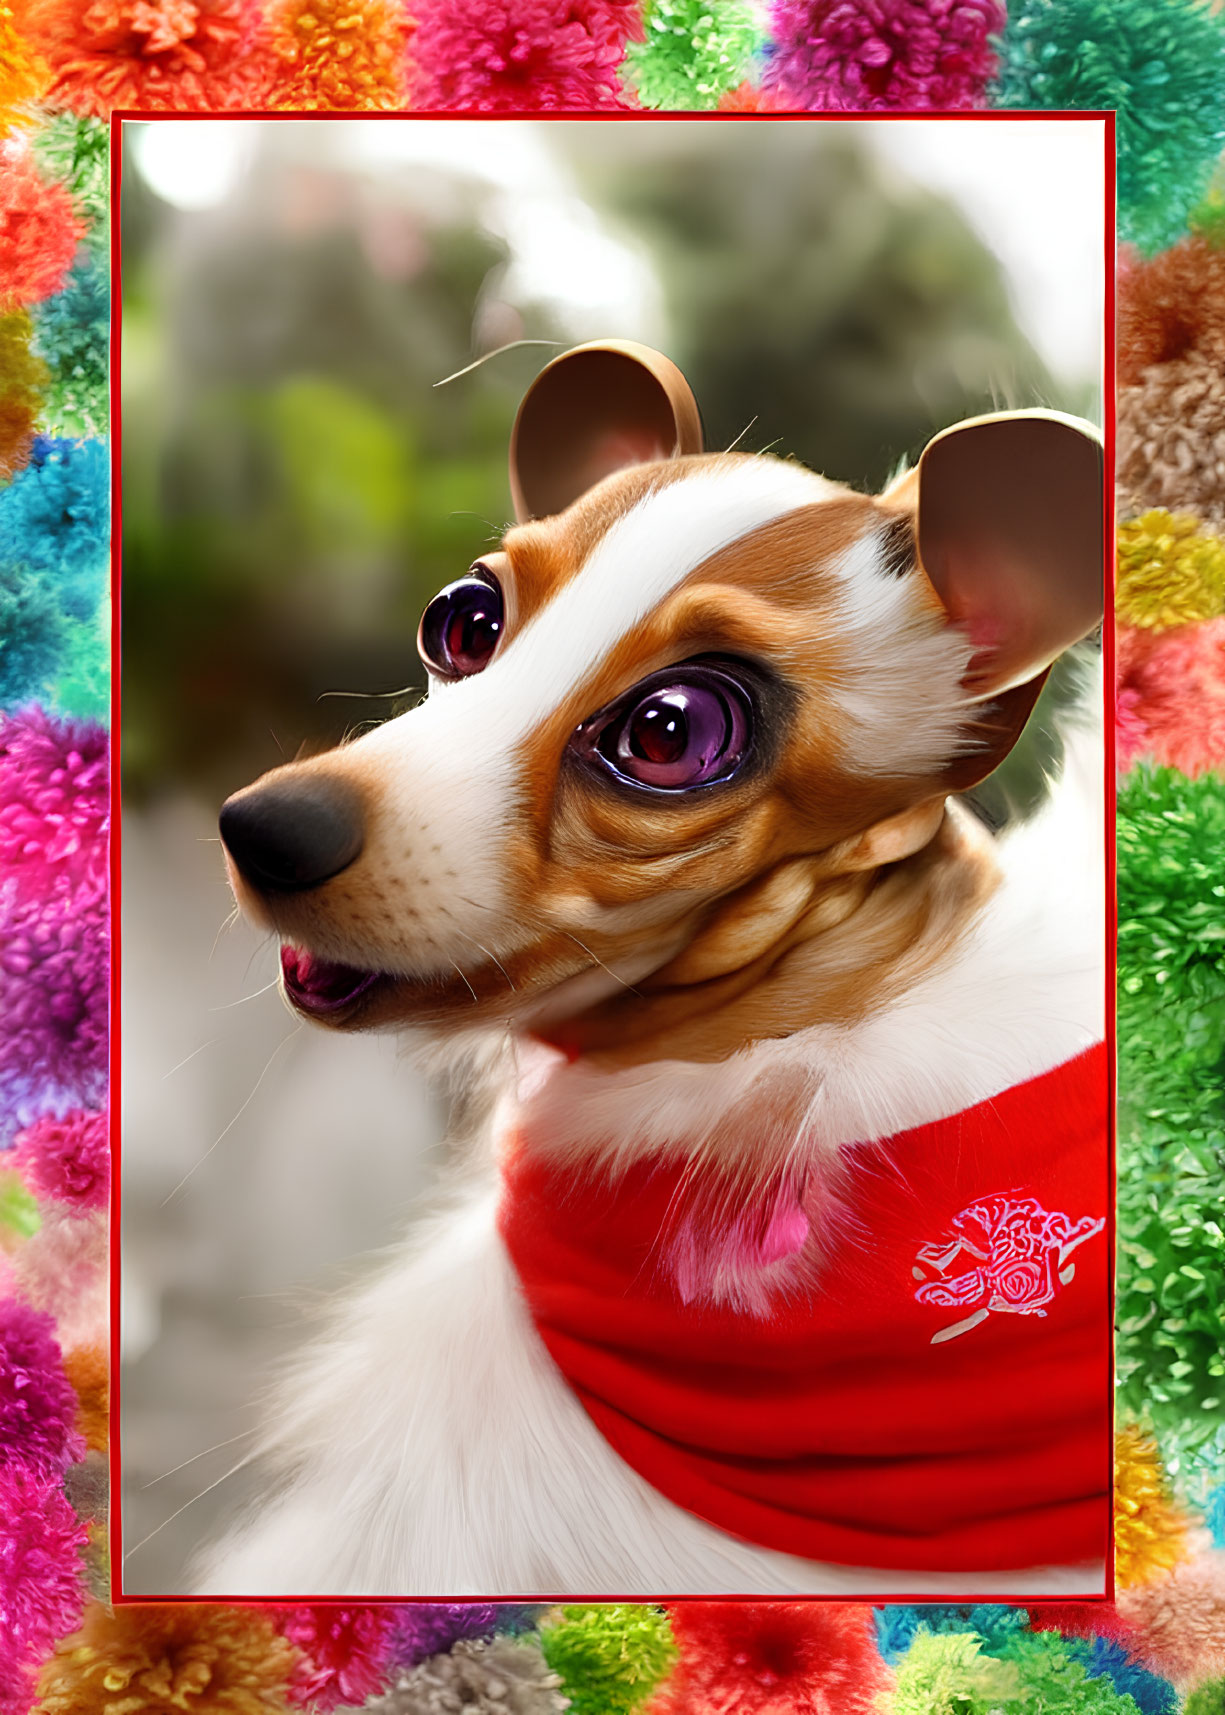 Colorful Cartoon Dog Illustration with Large Eyes and Red Garment